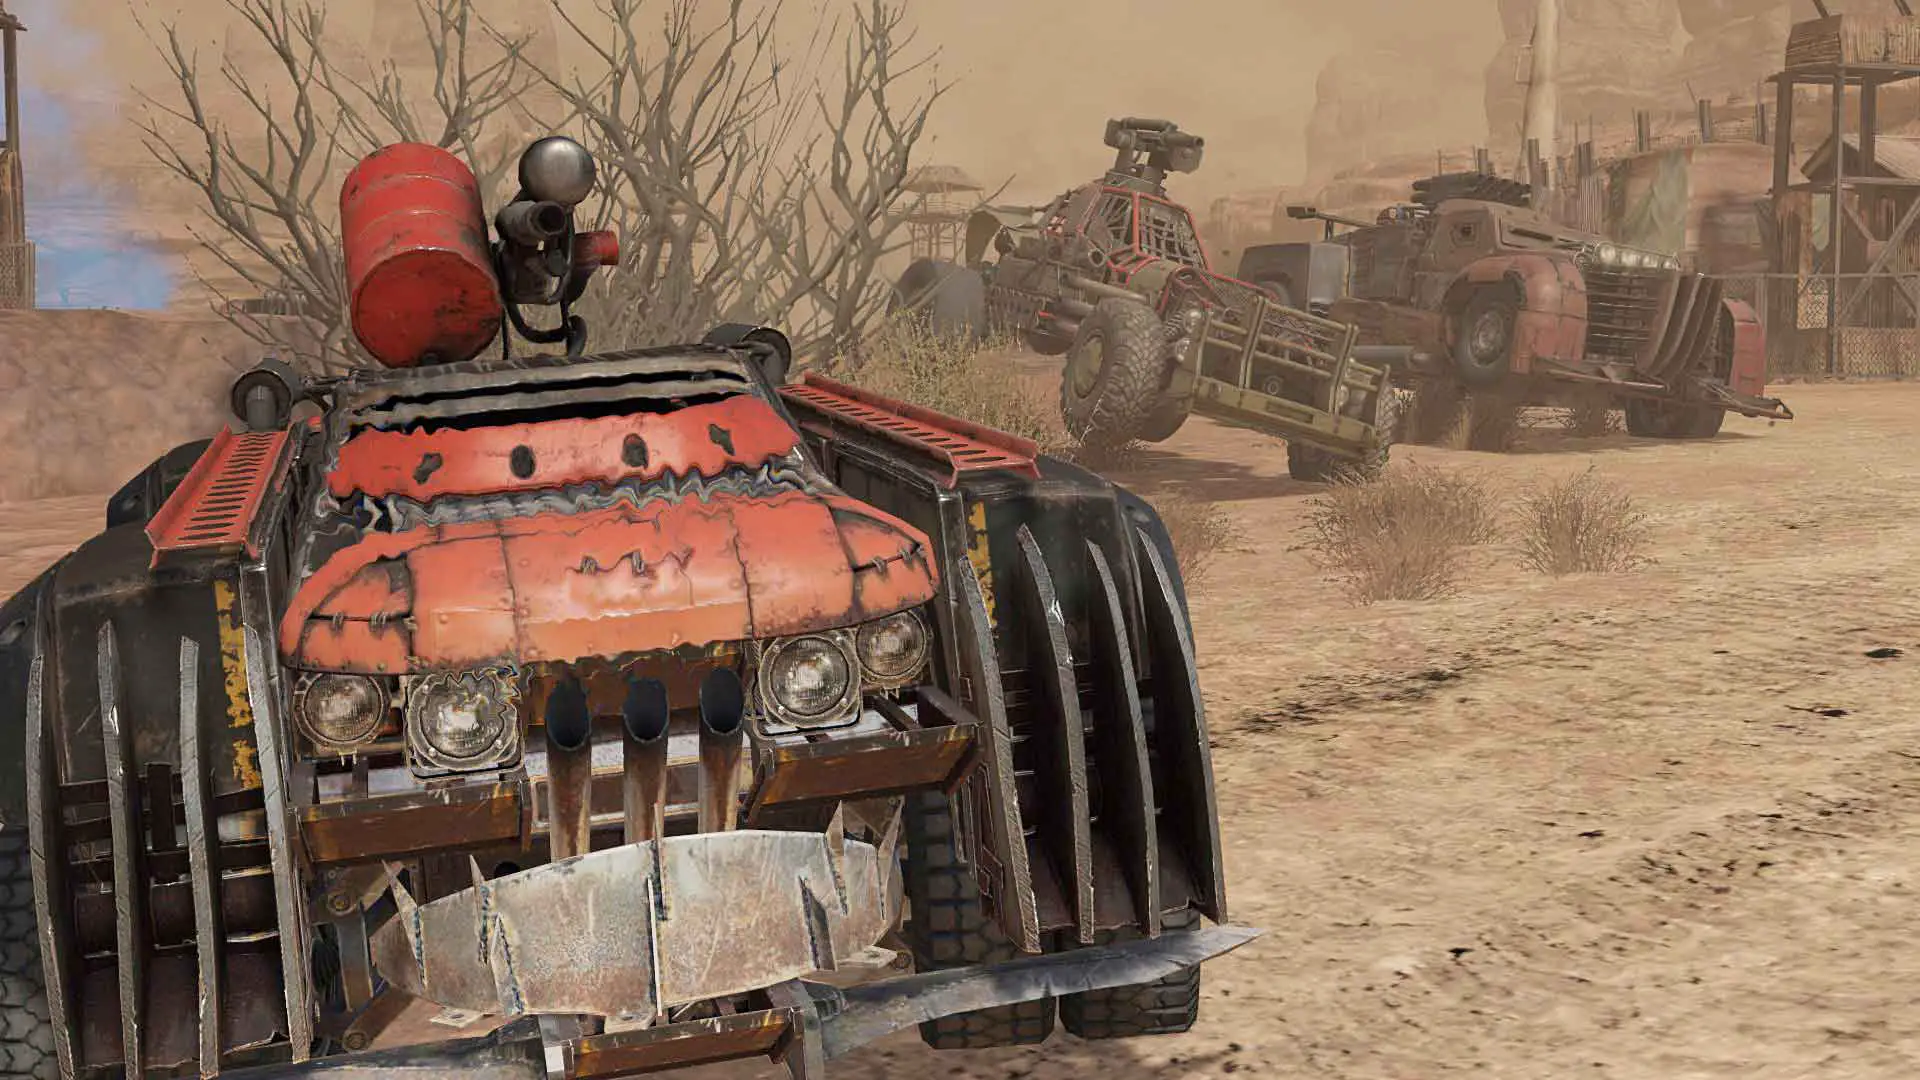 download free crossout 2022